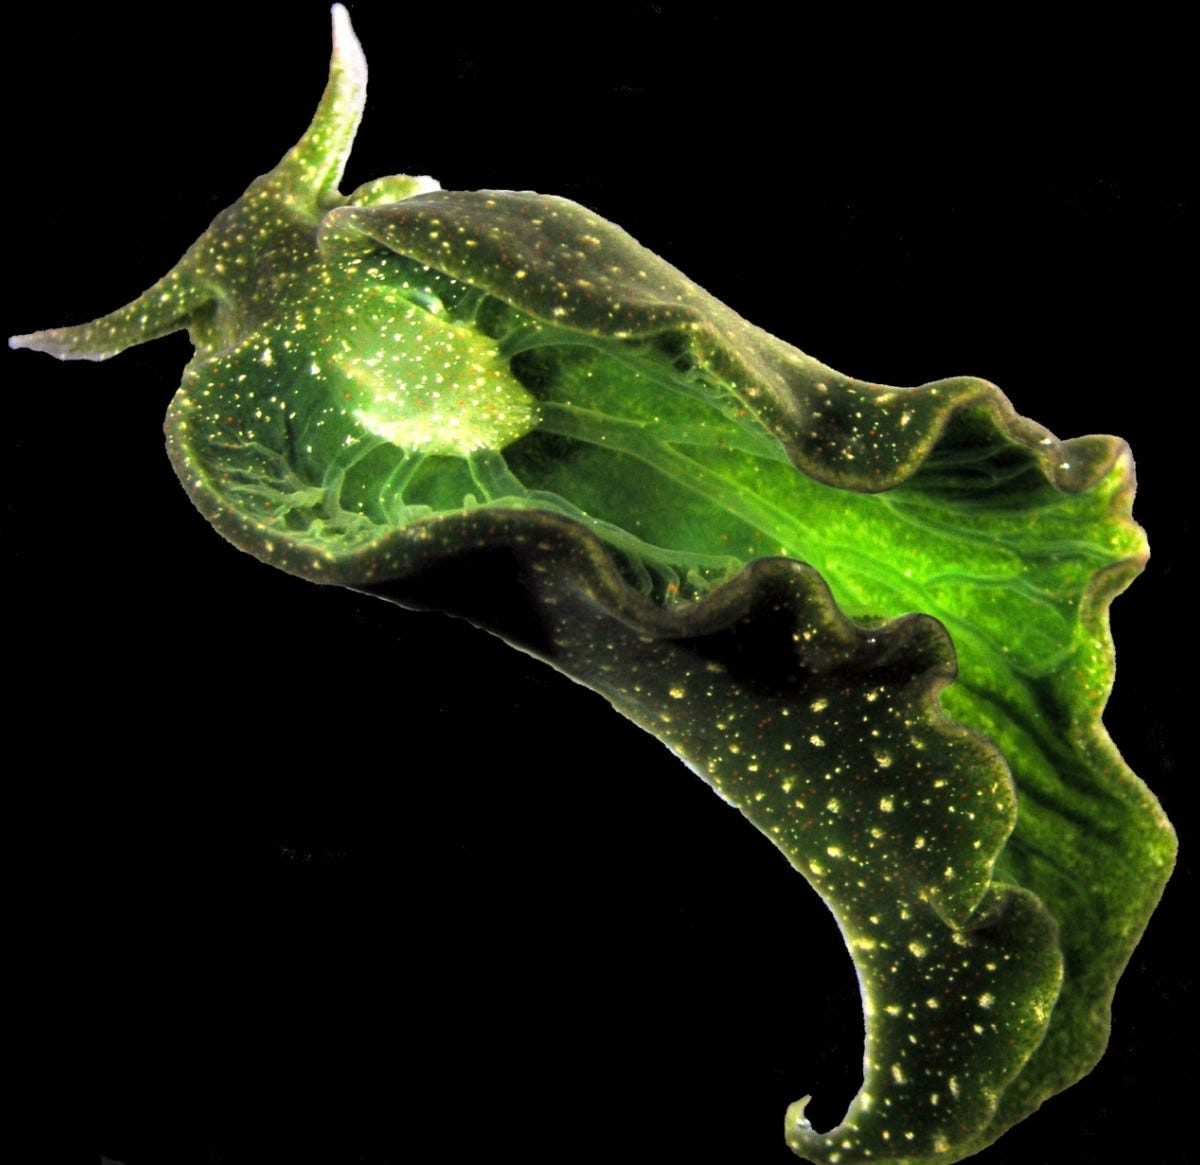 This emerald green sea slug is lit up by chloroplasts, which look like tiny stars throughotu its body. It appears to be glowing green along the center of its body.